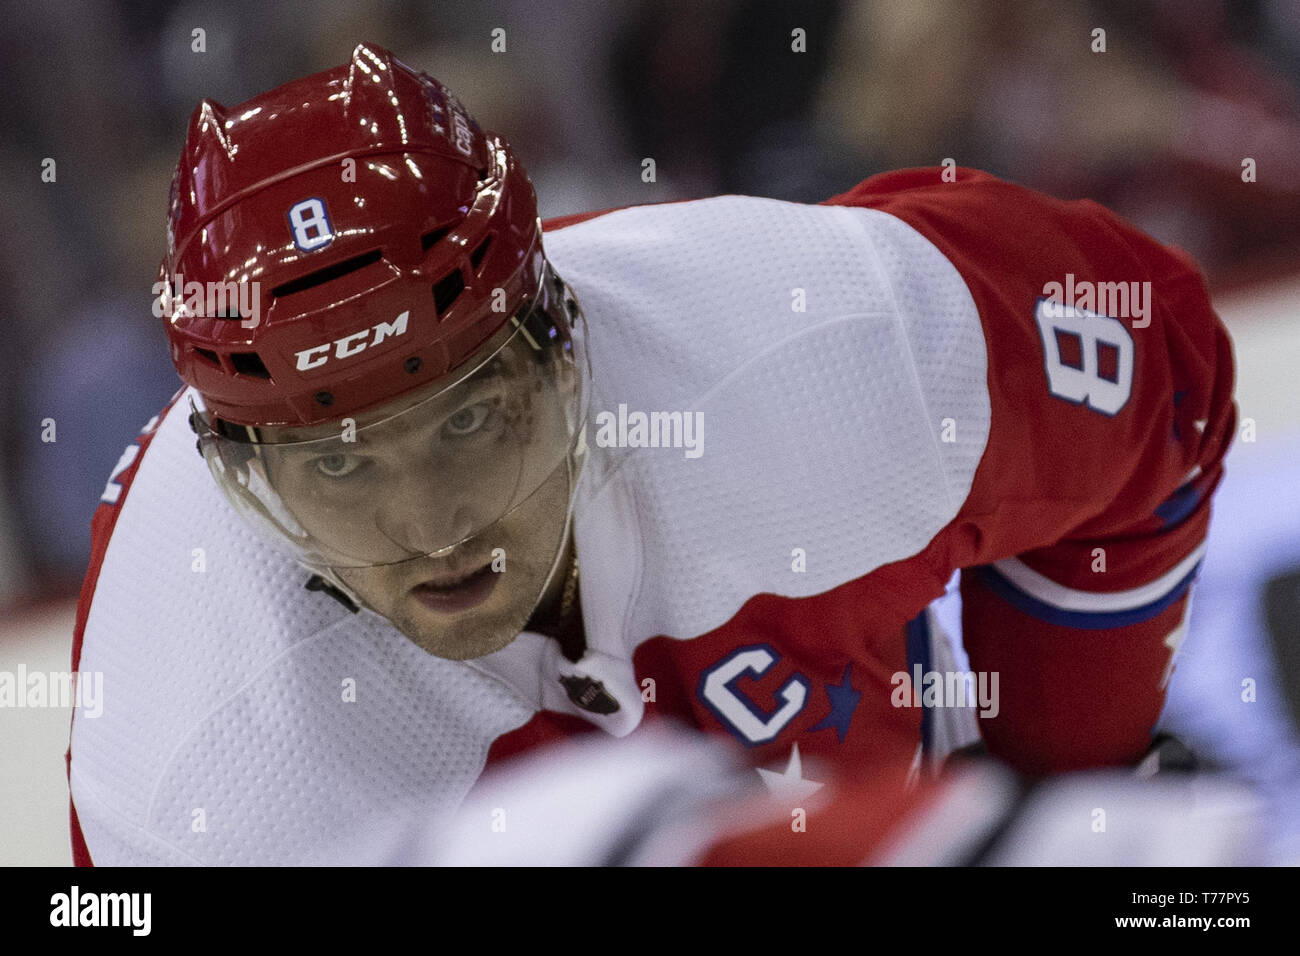 Washington, DC, USA. 26th Mar, 2019. Washington Capitals left wing Alex Ovechkin (8) looks on during a stoppage in play as the Carolina Hurricanes play the Washington Capitals at Capital One Arena in Washington, DC on March 26, 2019. The Capitals lead the Metropolitan Division and can clinch a Stanley Cup Playoff position tonight. Credit: Alex Edelman/ZUMA Wire/Alamy Live News Stock Photo